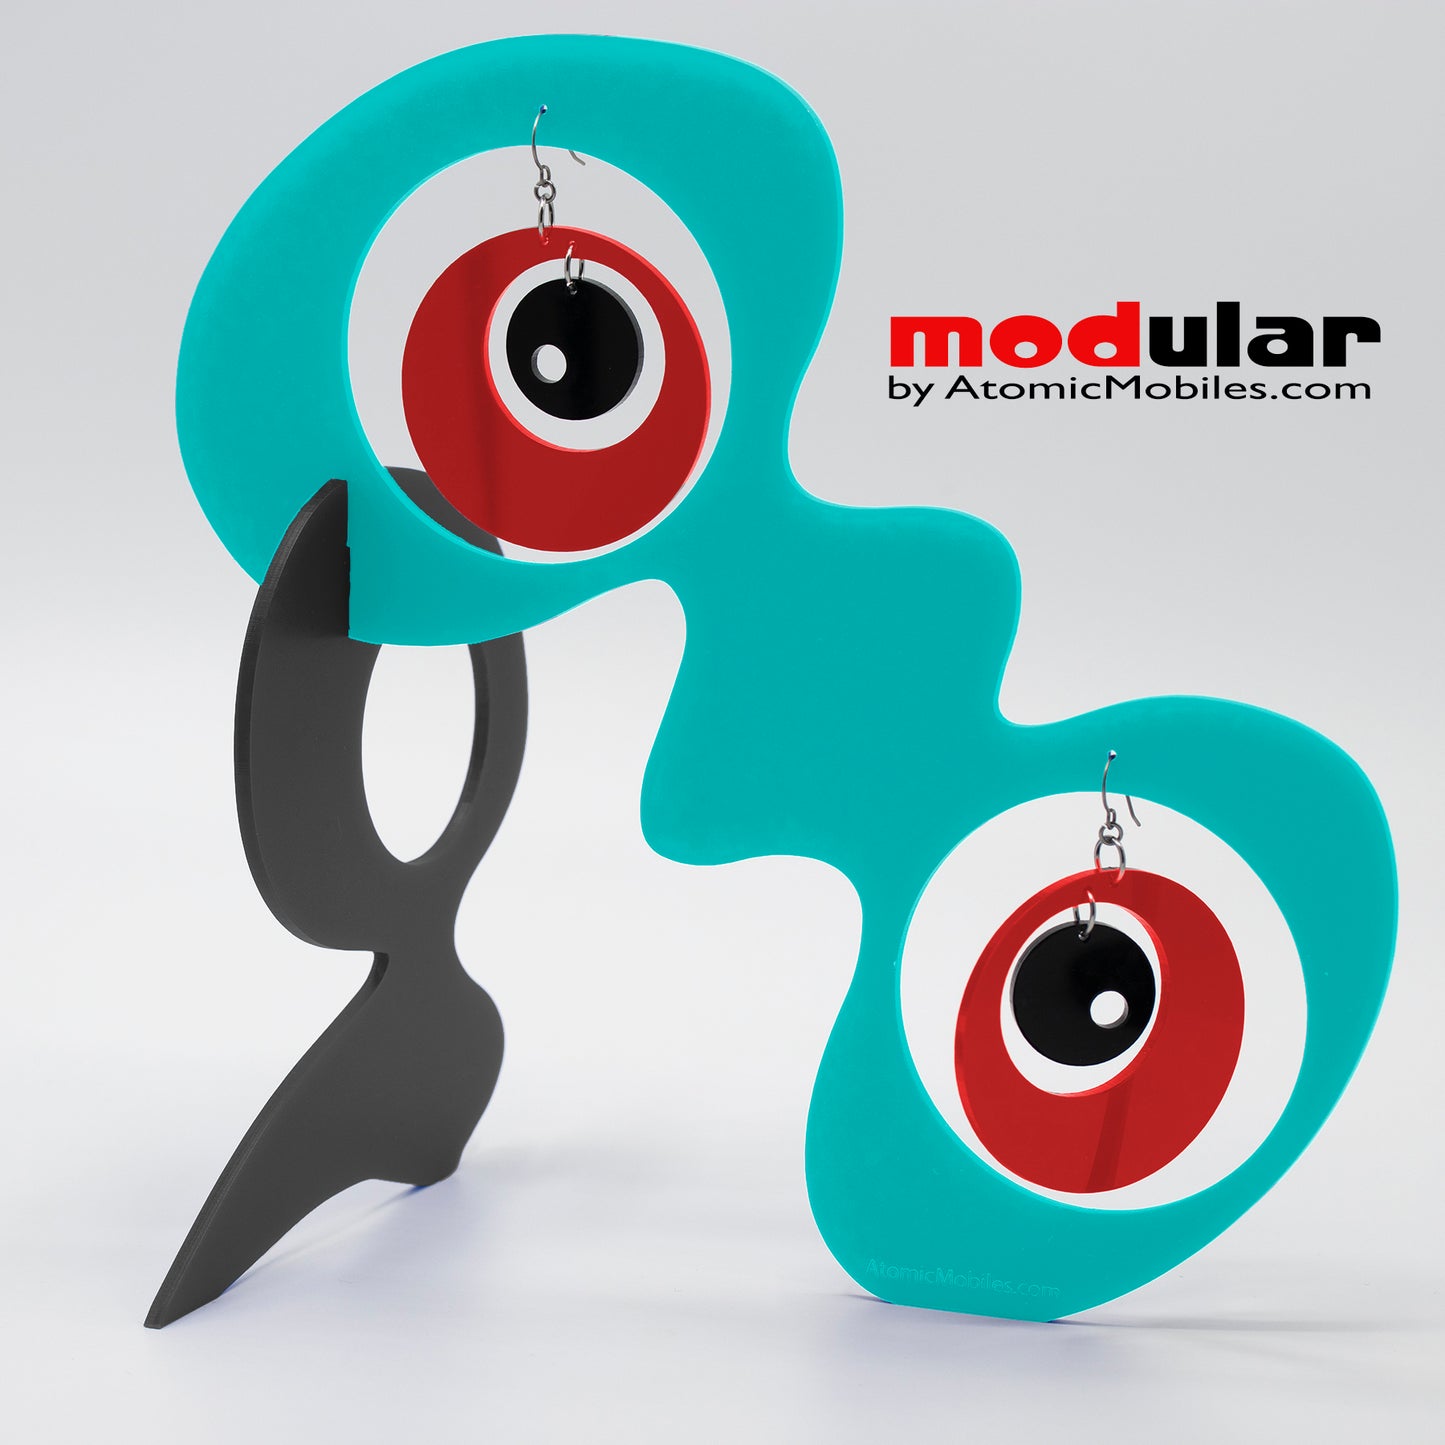 Handmade Groovy style earrings and stabile kinetic modern art sculpture in Aqua Red and Black by AtomicMobiles.com